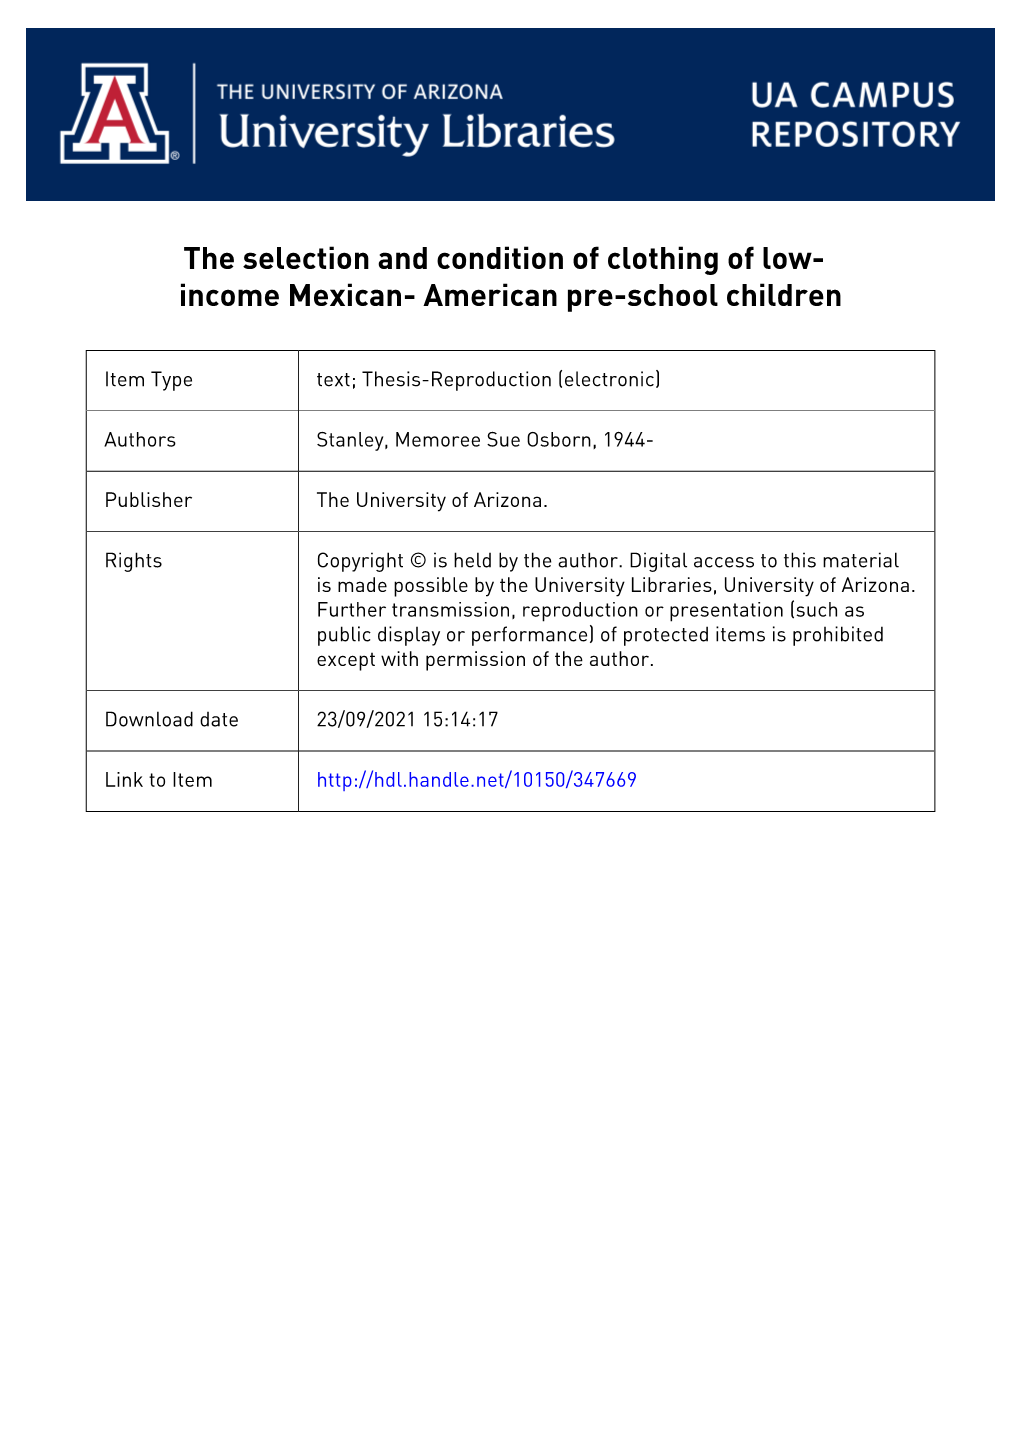 The Selection M D Condition of Clothing of Low